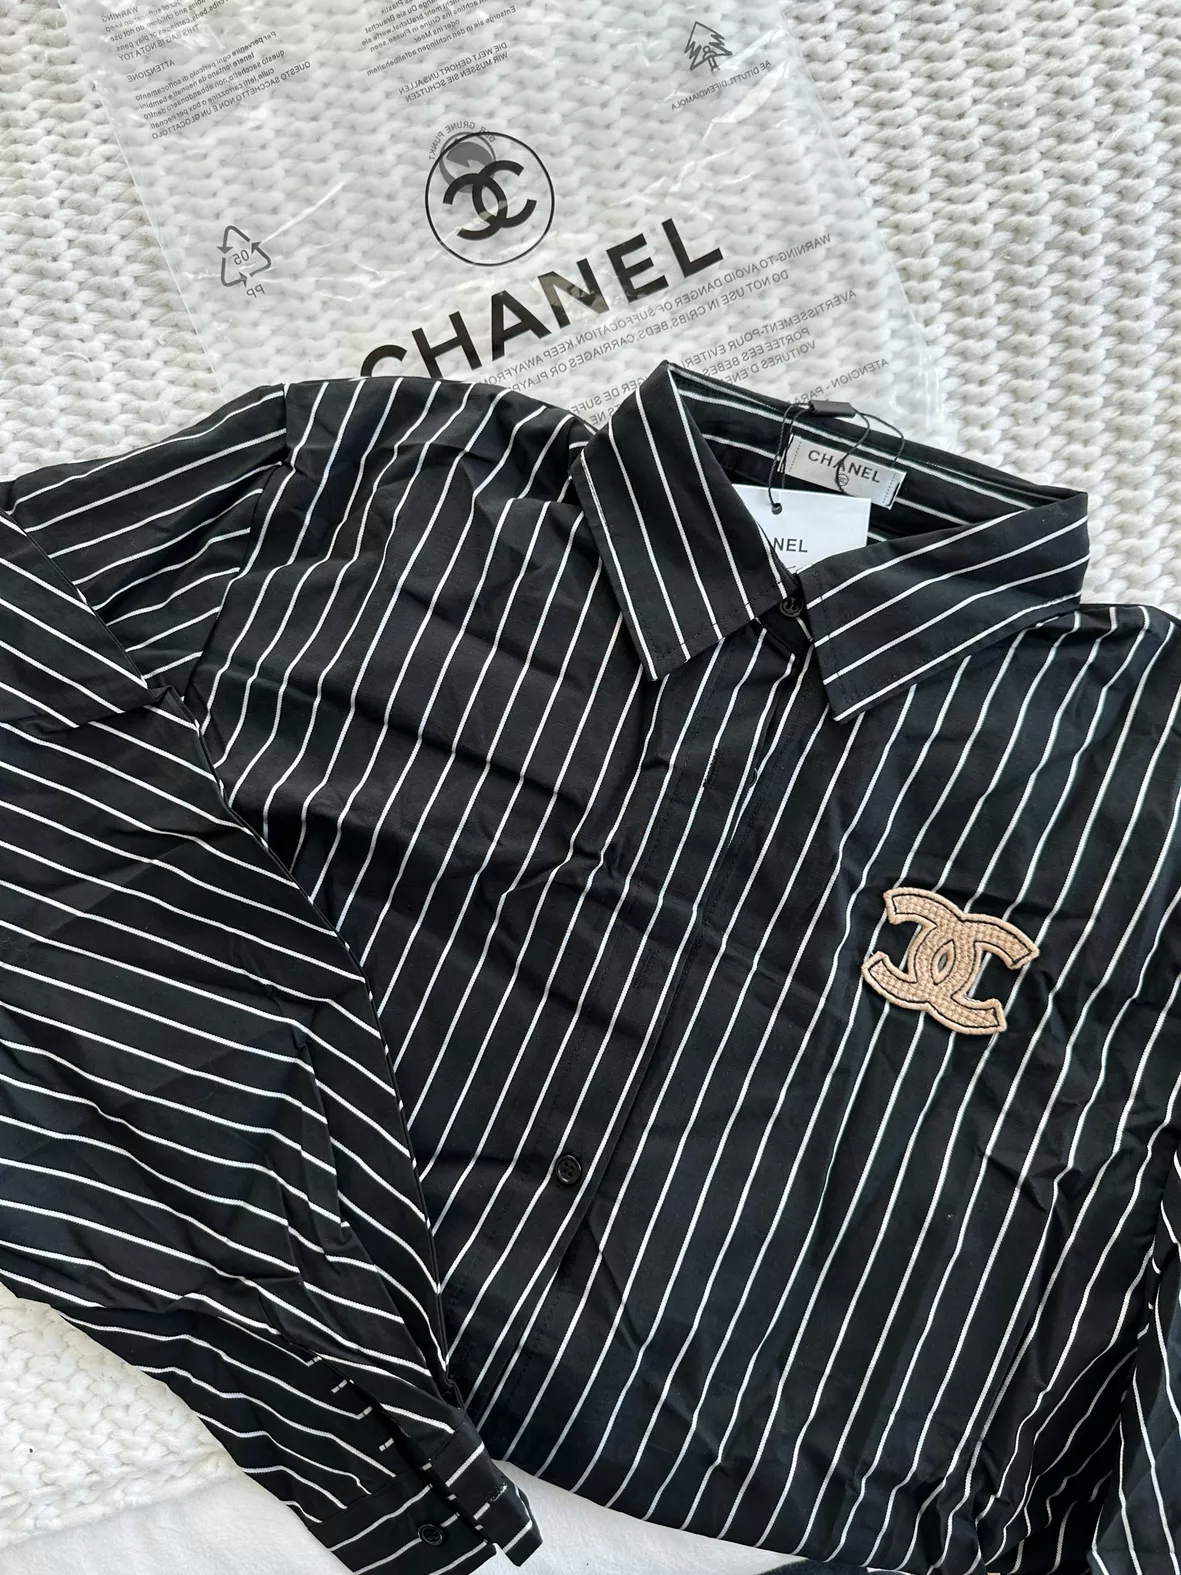 CHANEL, Shirts, Chanel Mens Striped Button Front Dress Shirt